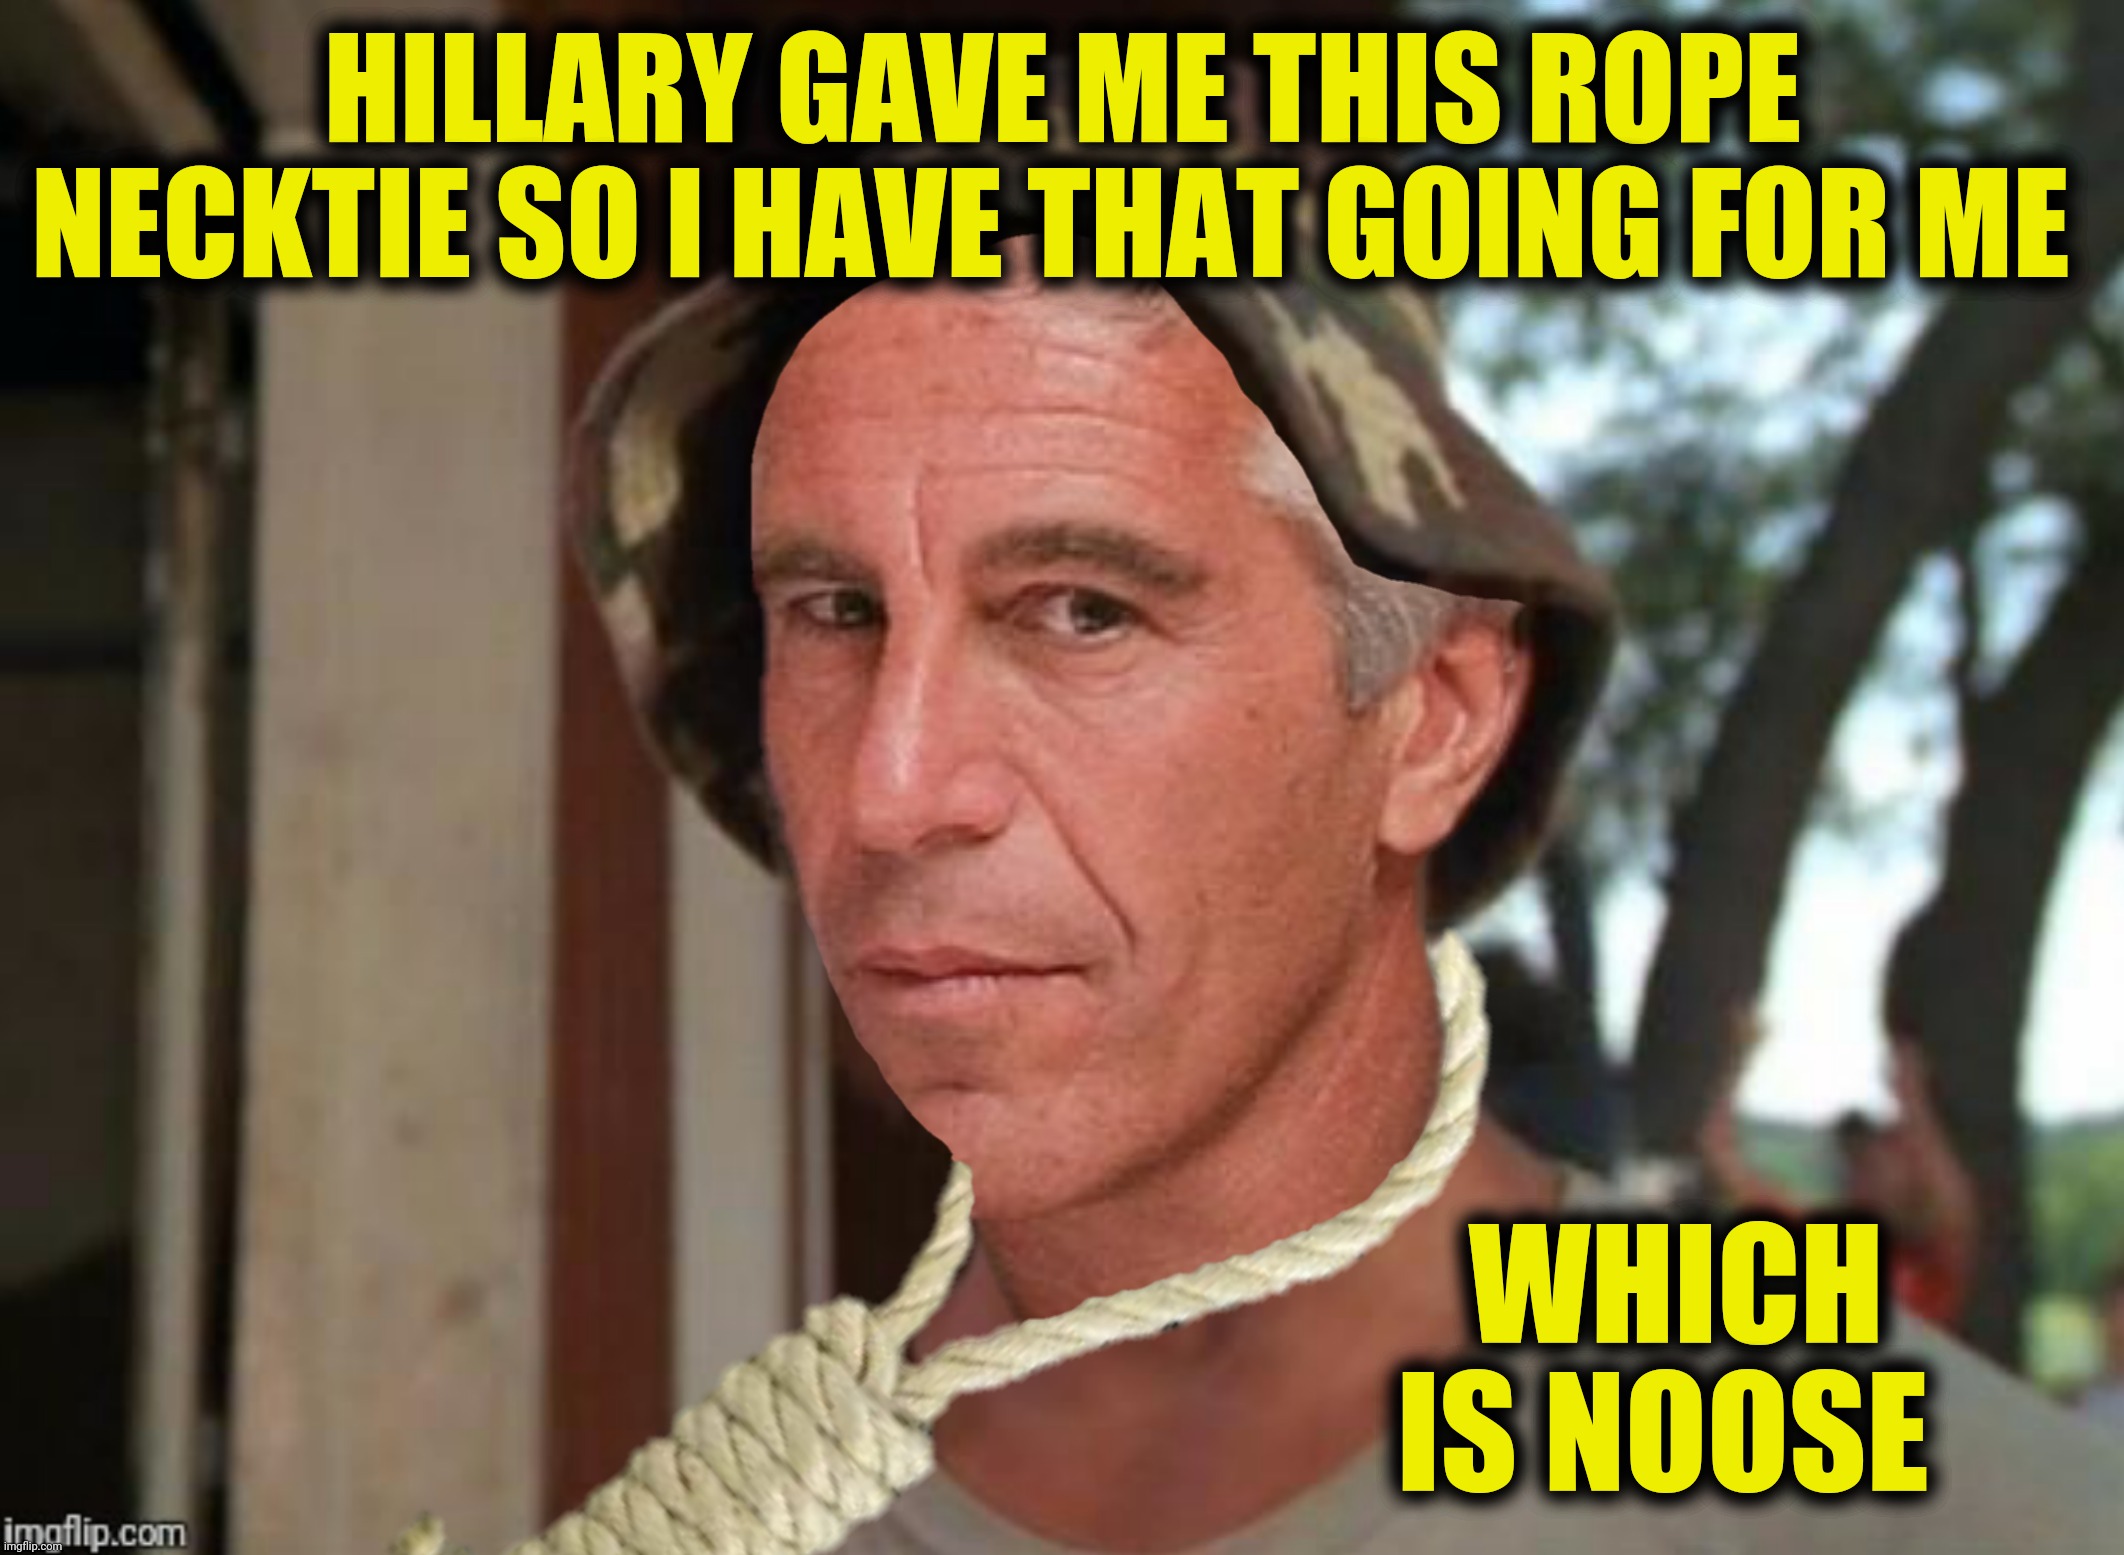 HILLARY GAVE ME THIS ROPE NECKTIE SO I HAVE THAT GOING FOR ME WHICH IS NOOSE | made w/ Imgflip meme maker